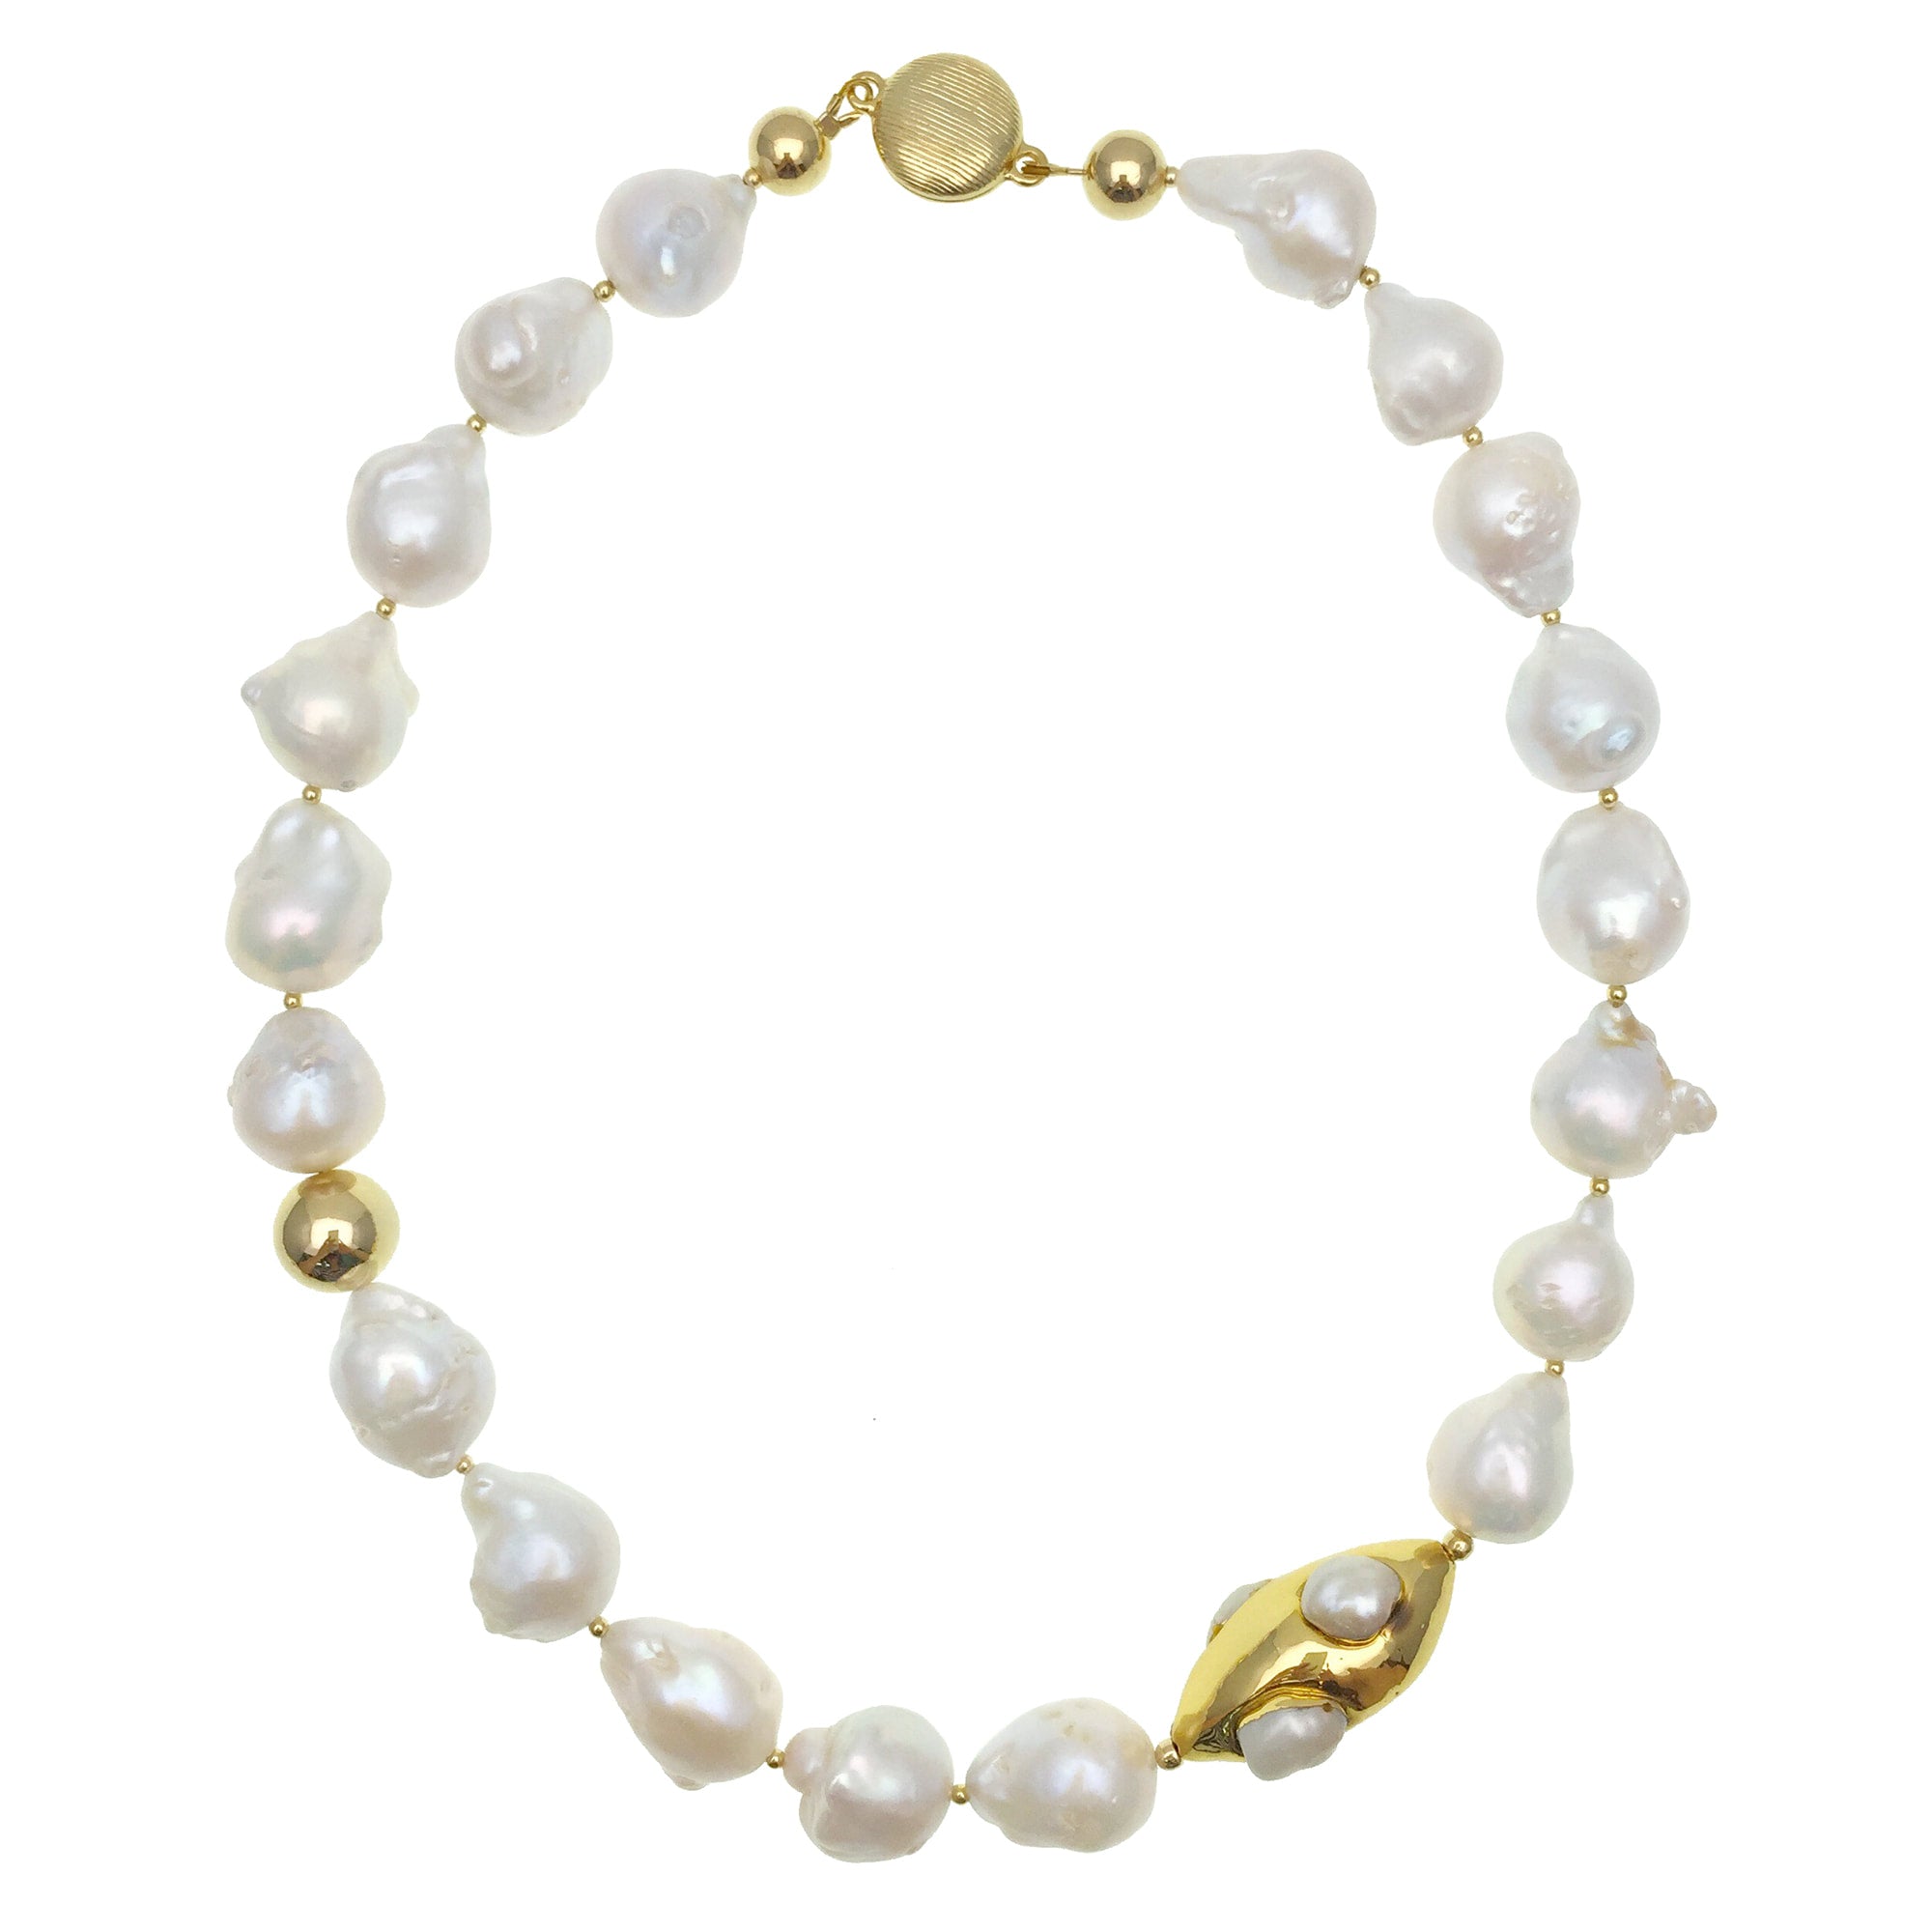 Baroque White Pearls with Pearl Inlaid Gold Bead Necklace - shop idPearl